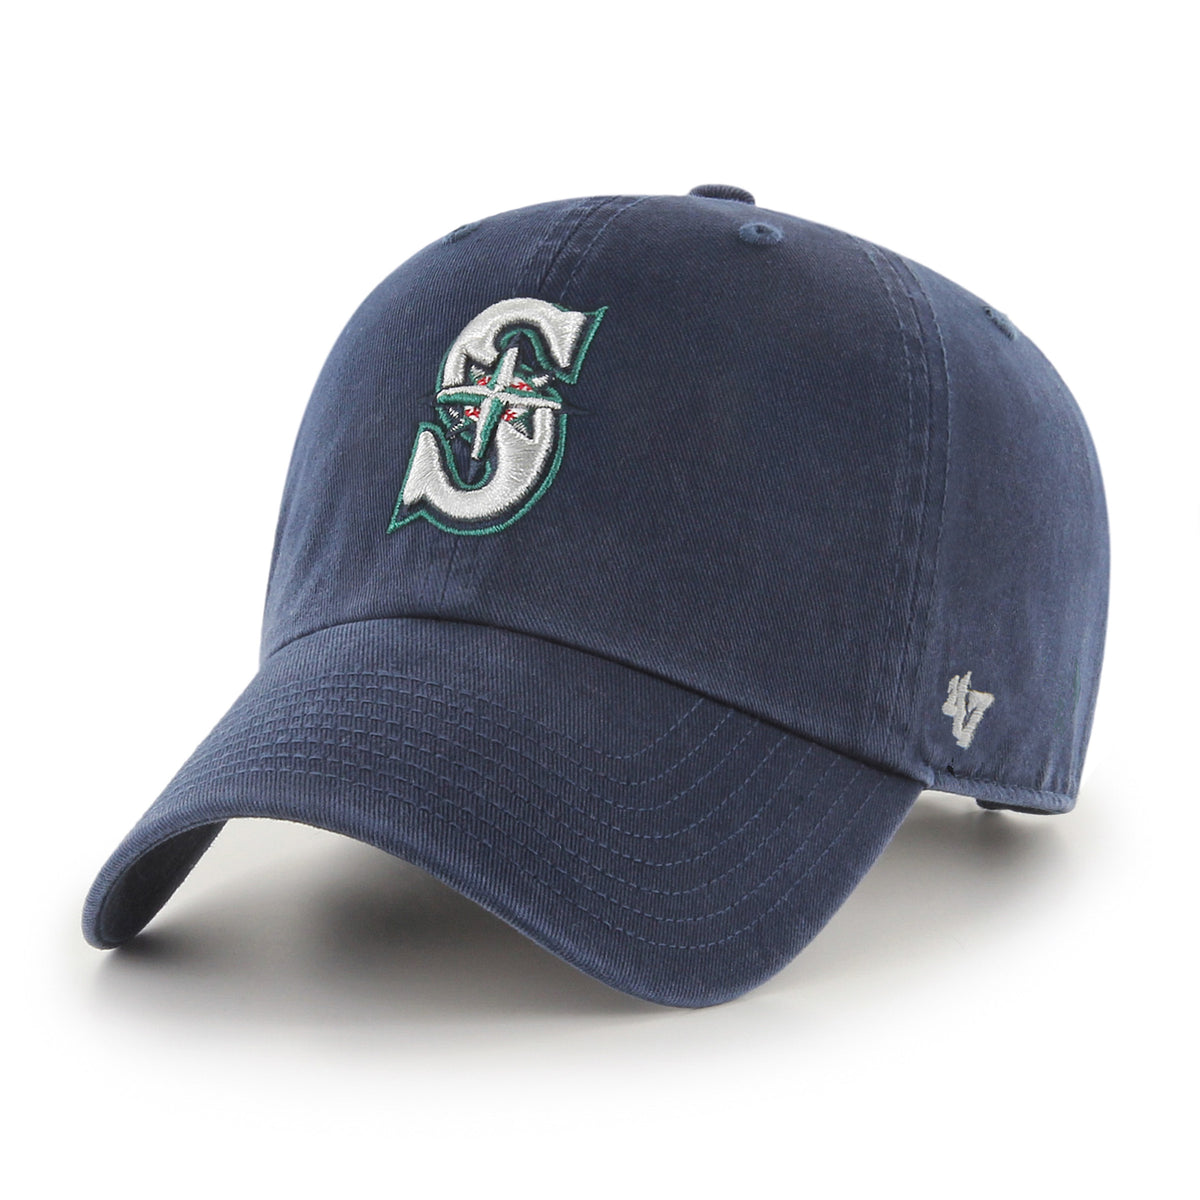 SEATTLE MARINERS '47 CLEAN UP